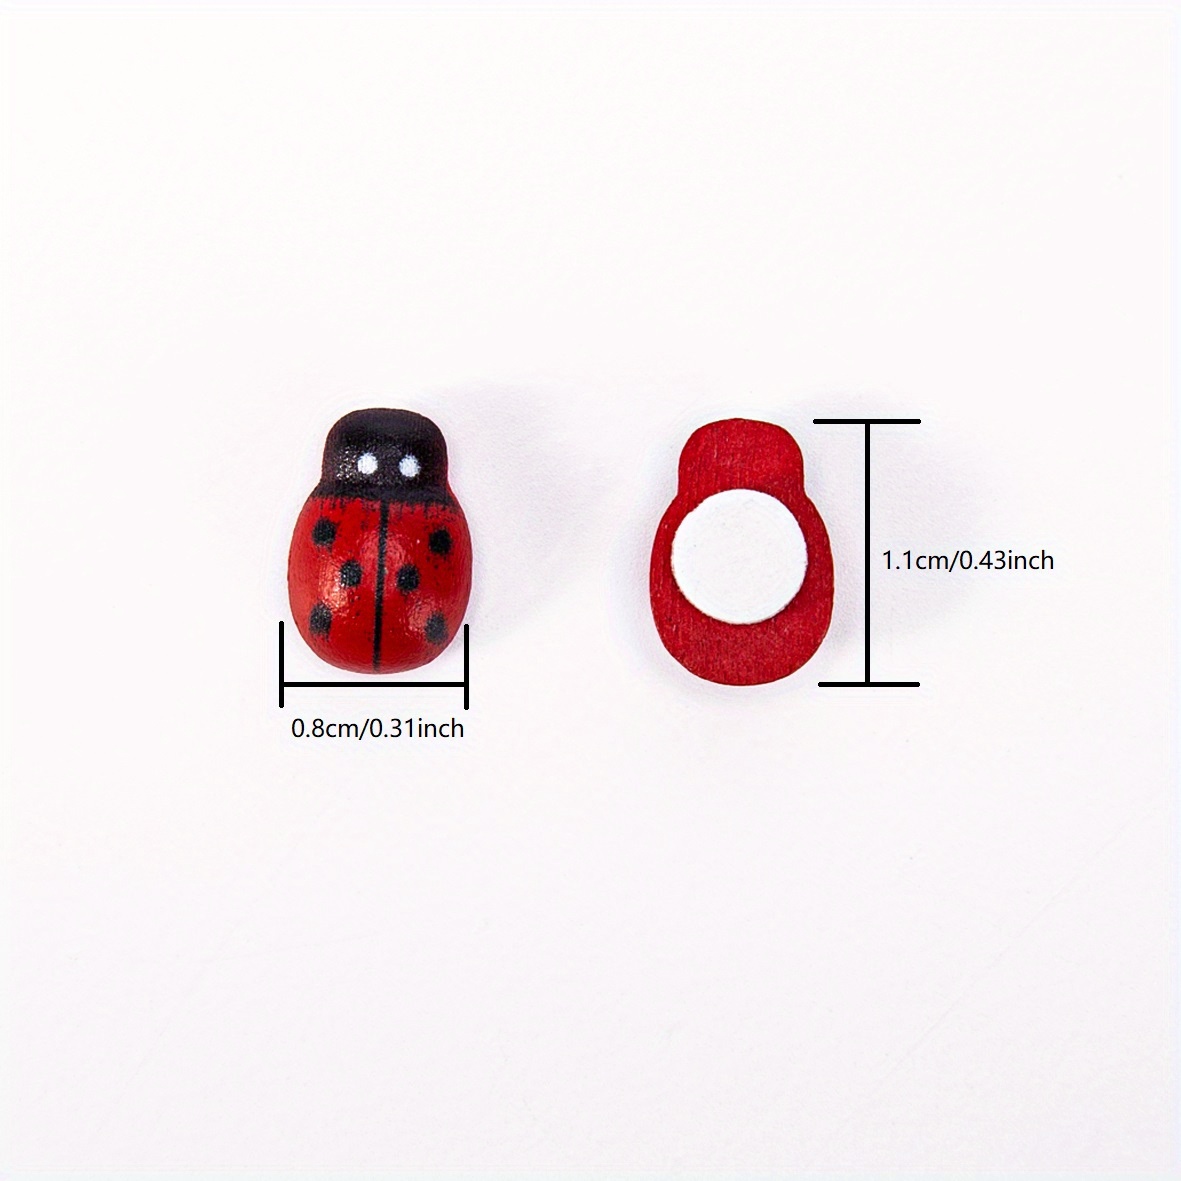 100pcs wood mini 8x11mm red ladybug ladybirds self adhesive diy easter crafts home decoration wooden card making toppers embellishments flatback stickers details 0